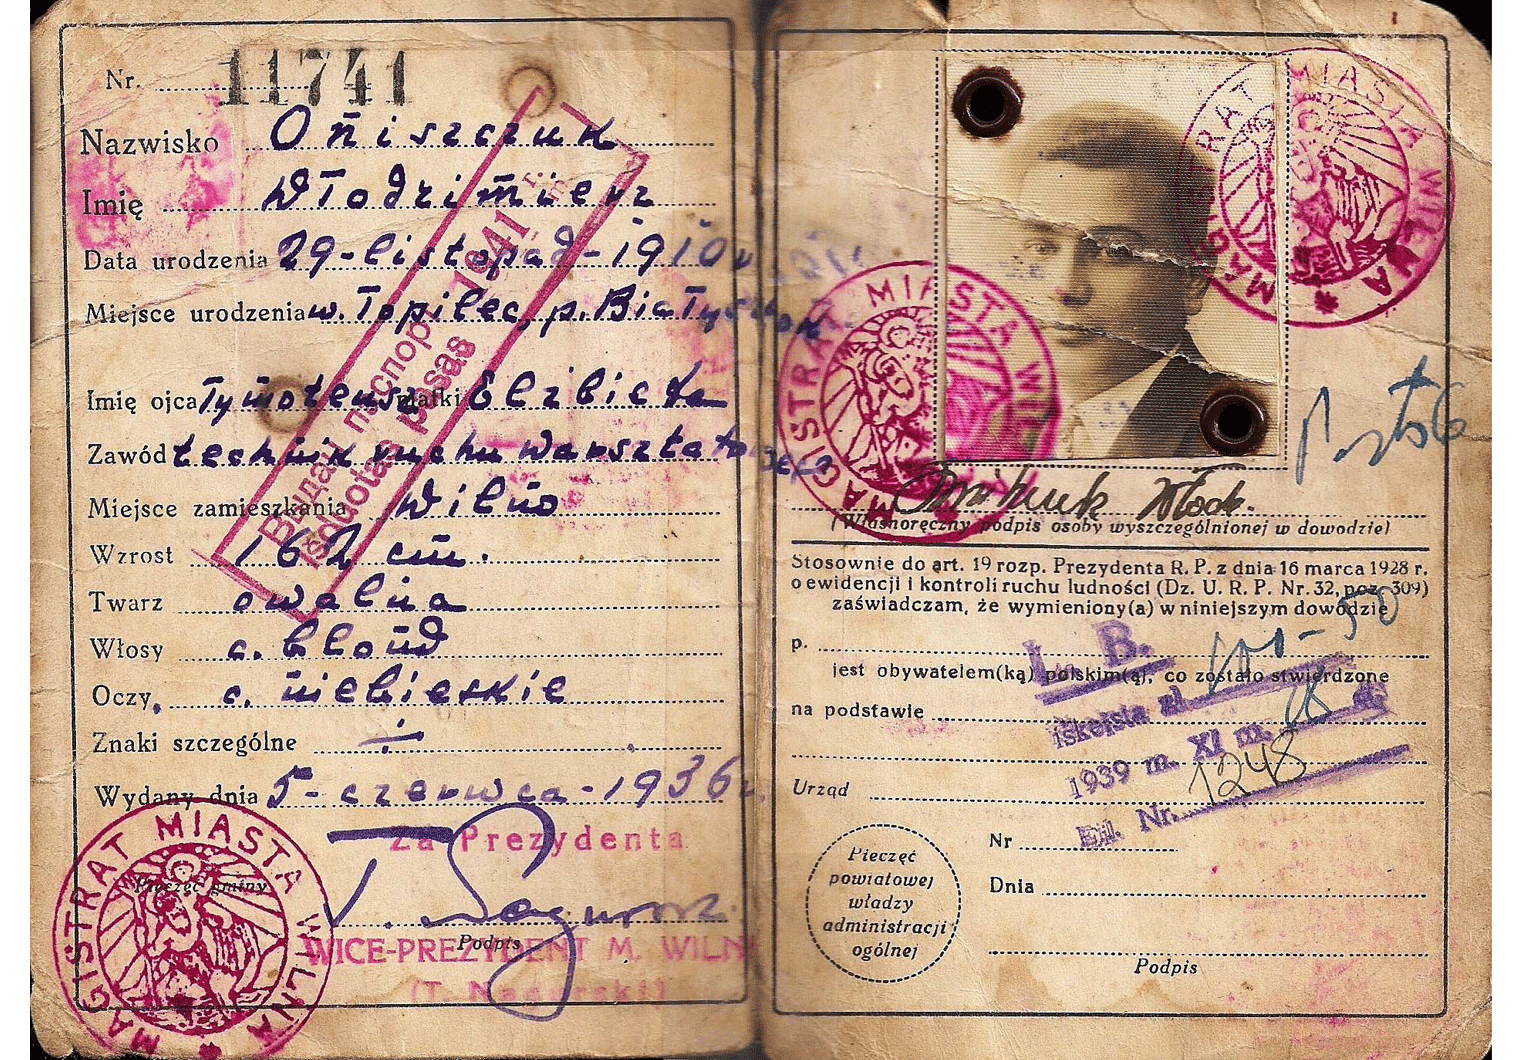 Important short-lived WWII related visa